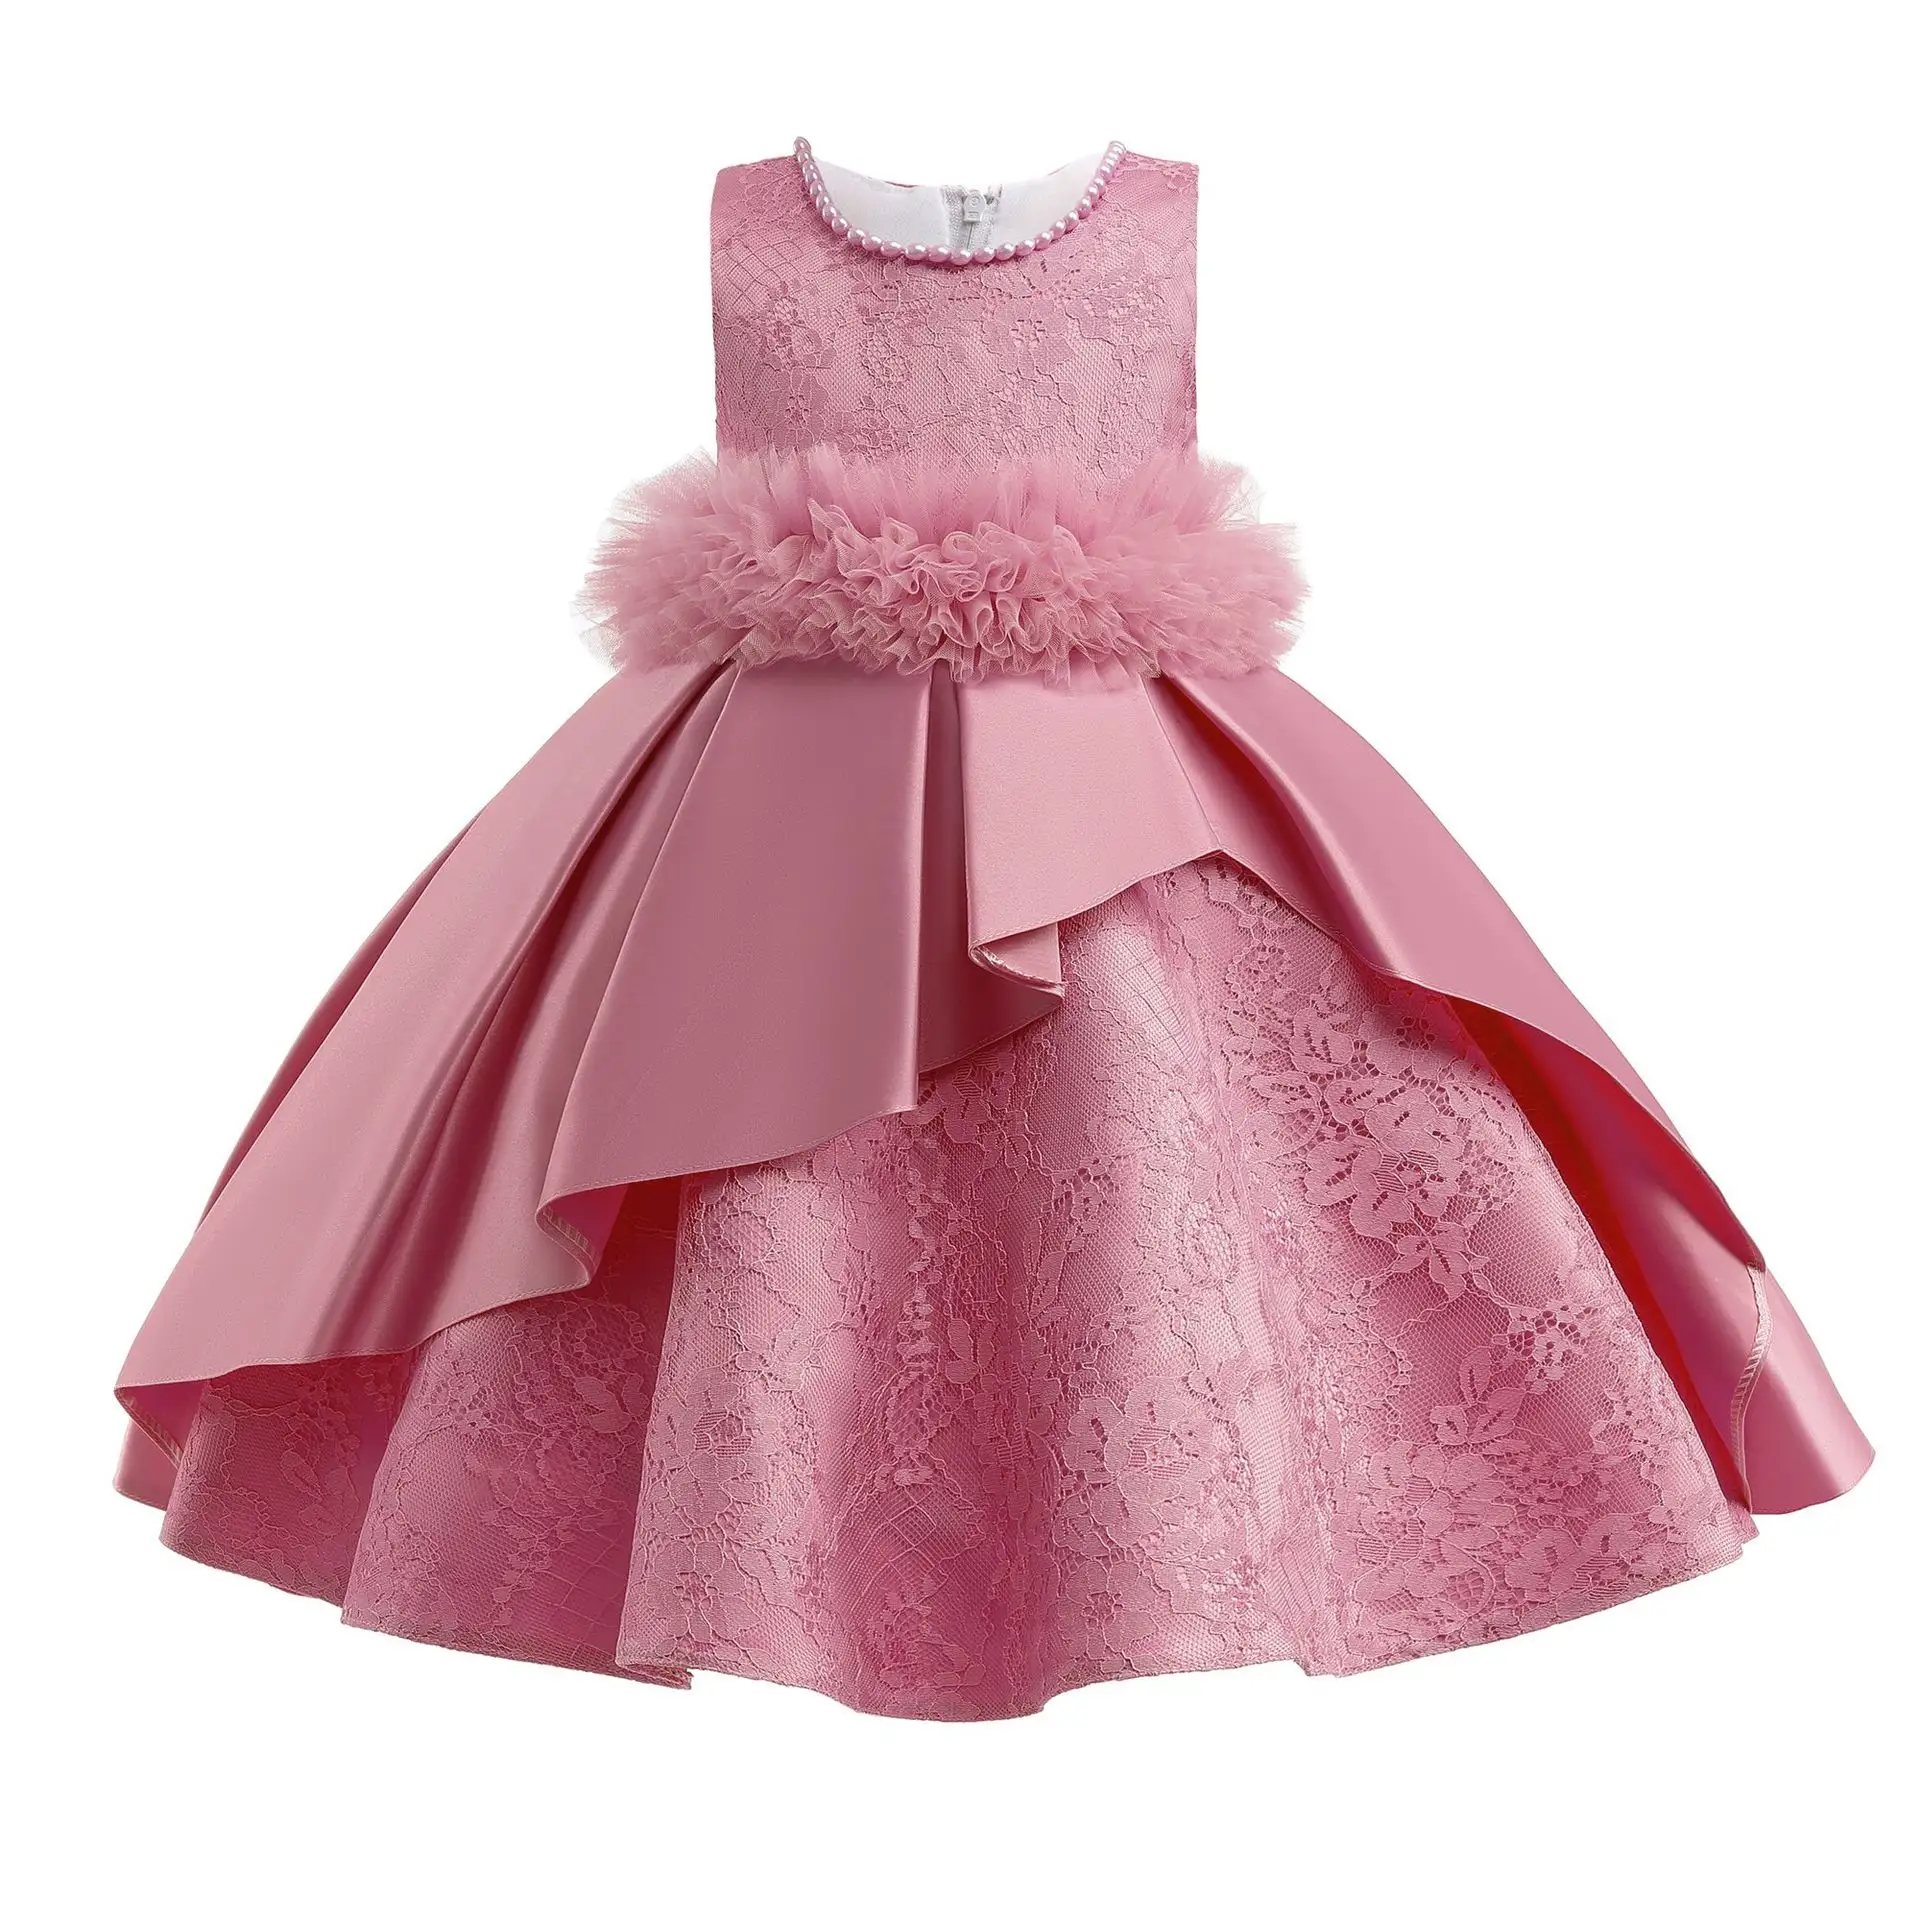 Girls clothing Holiday party Evening Ball evening gown Birthday party Princess dress sleeveless lace dress